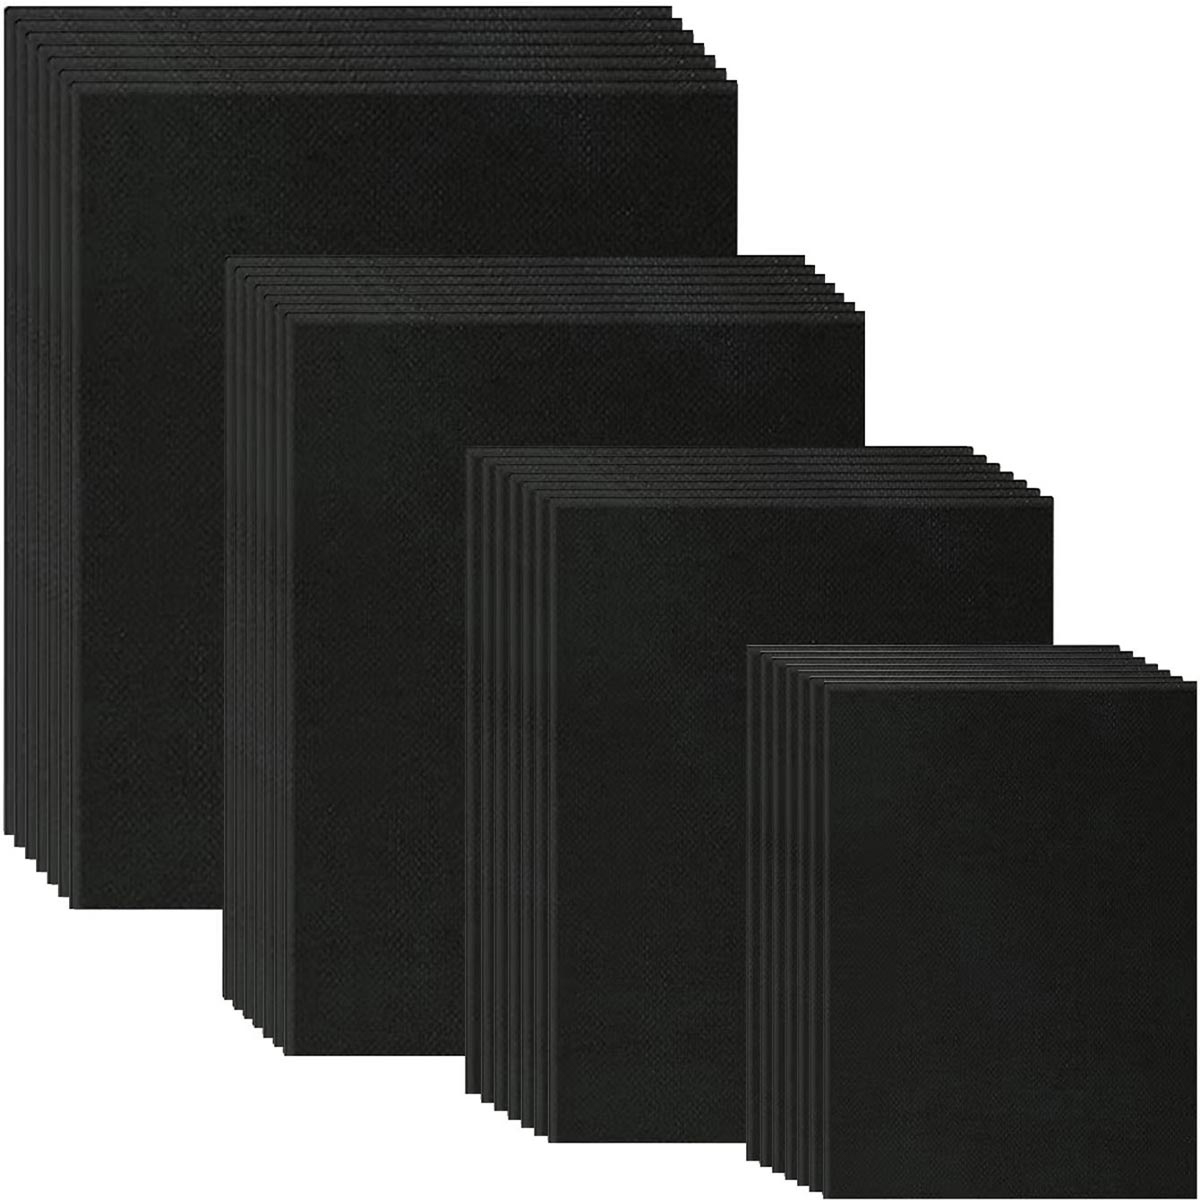 Canvas Boards for Painting,Blank Black Canvas Panels,8 oz Gesso-Primed, Art Supplies for Acrylic Pouring and Oil Painting.